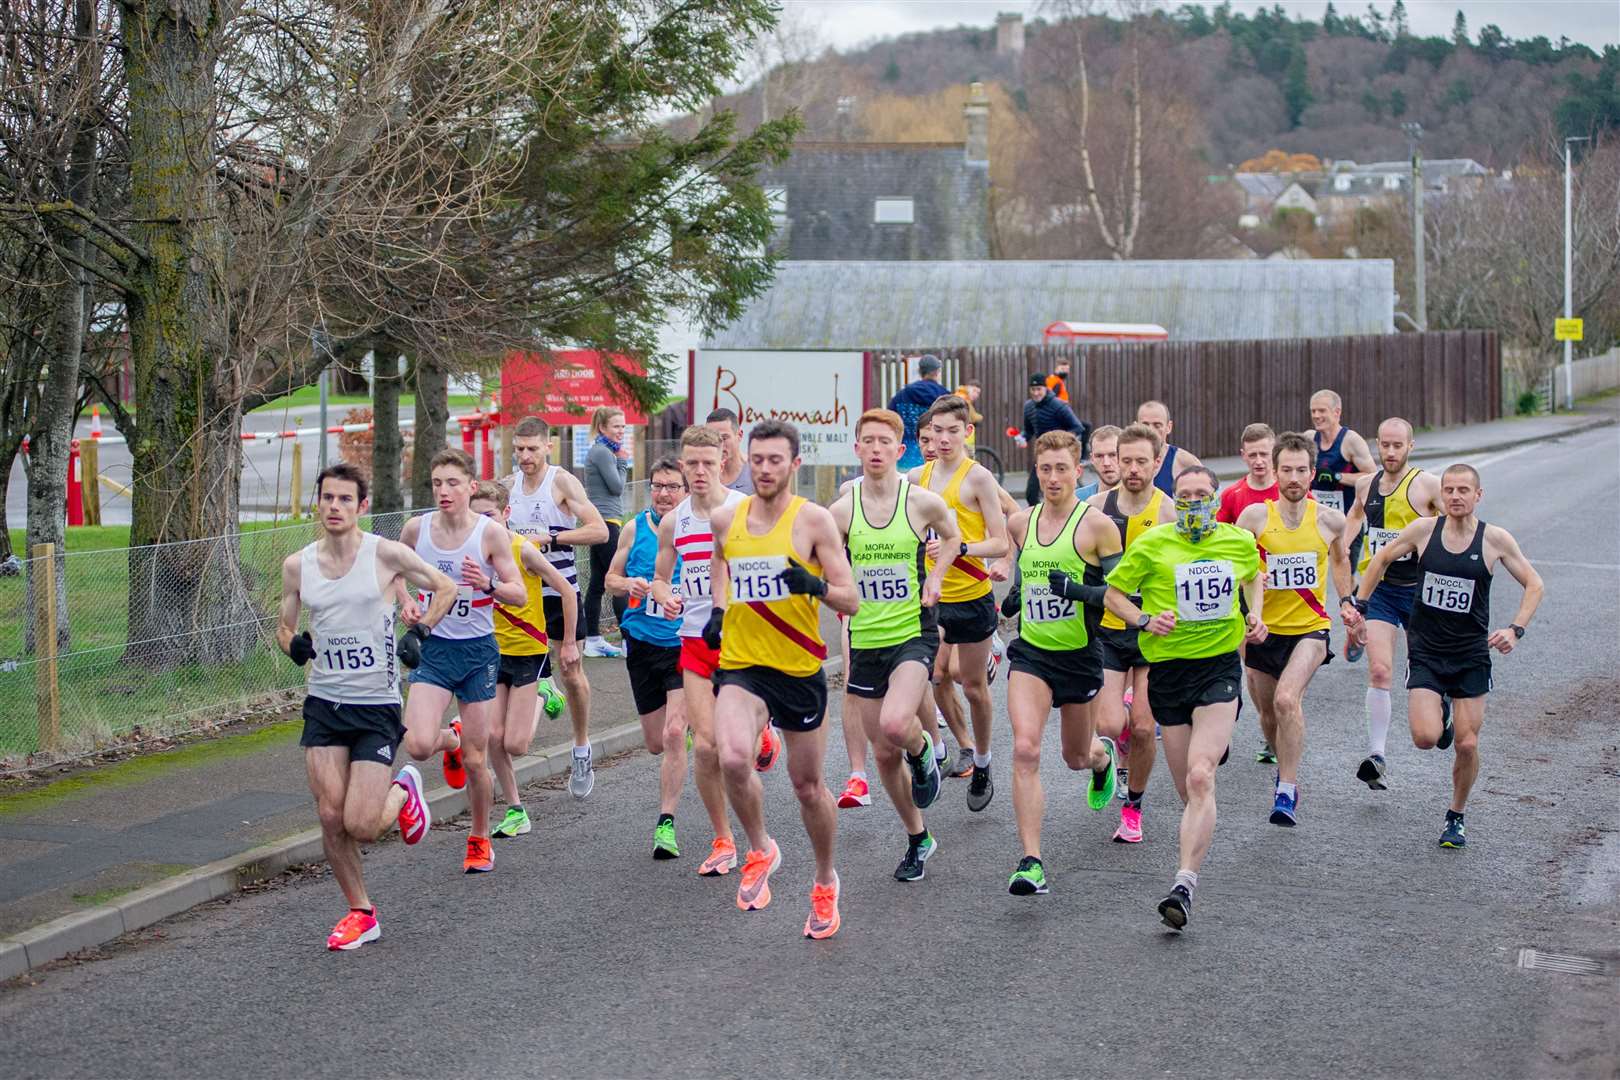 Sean Chalmers (1151) leads the first wave of runners at the Back to Basics 10k from Benromach distillery. Picture: Daniel Forsyth